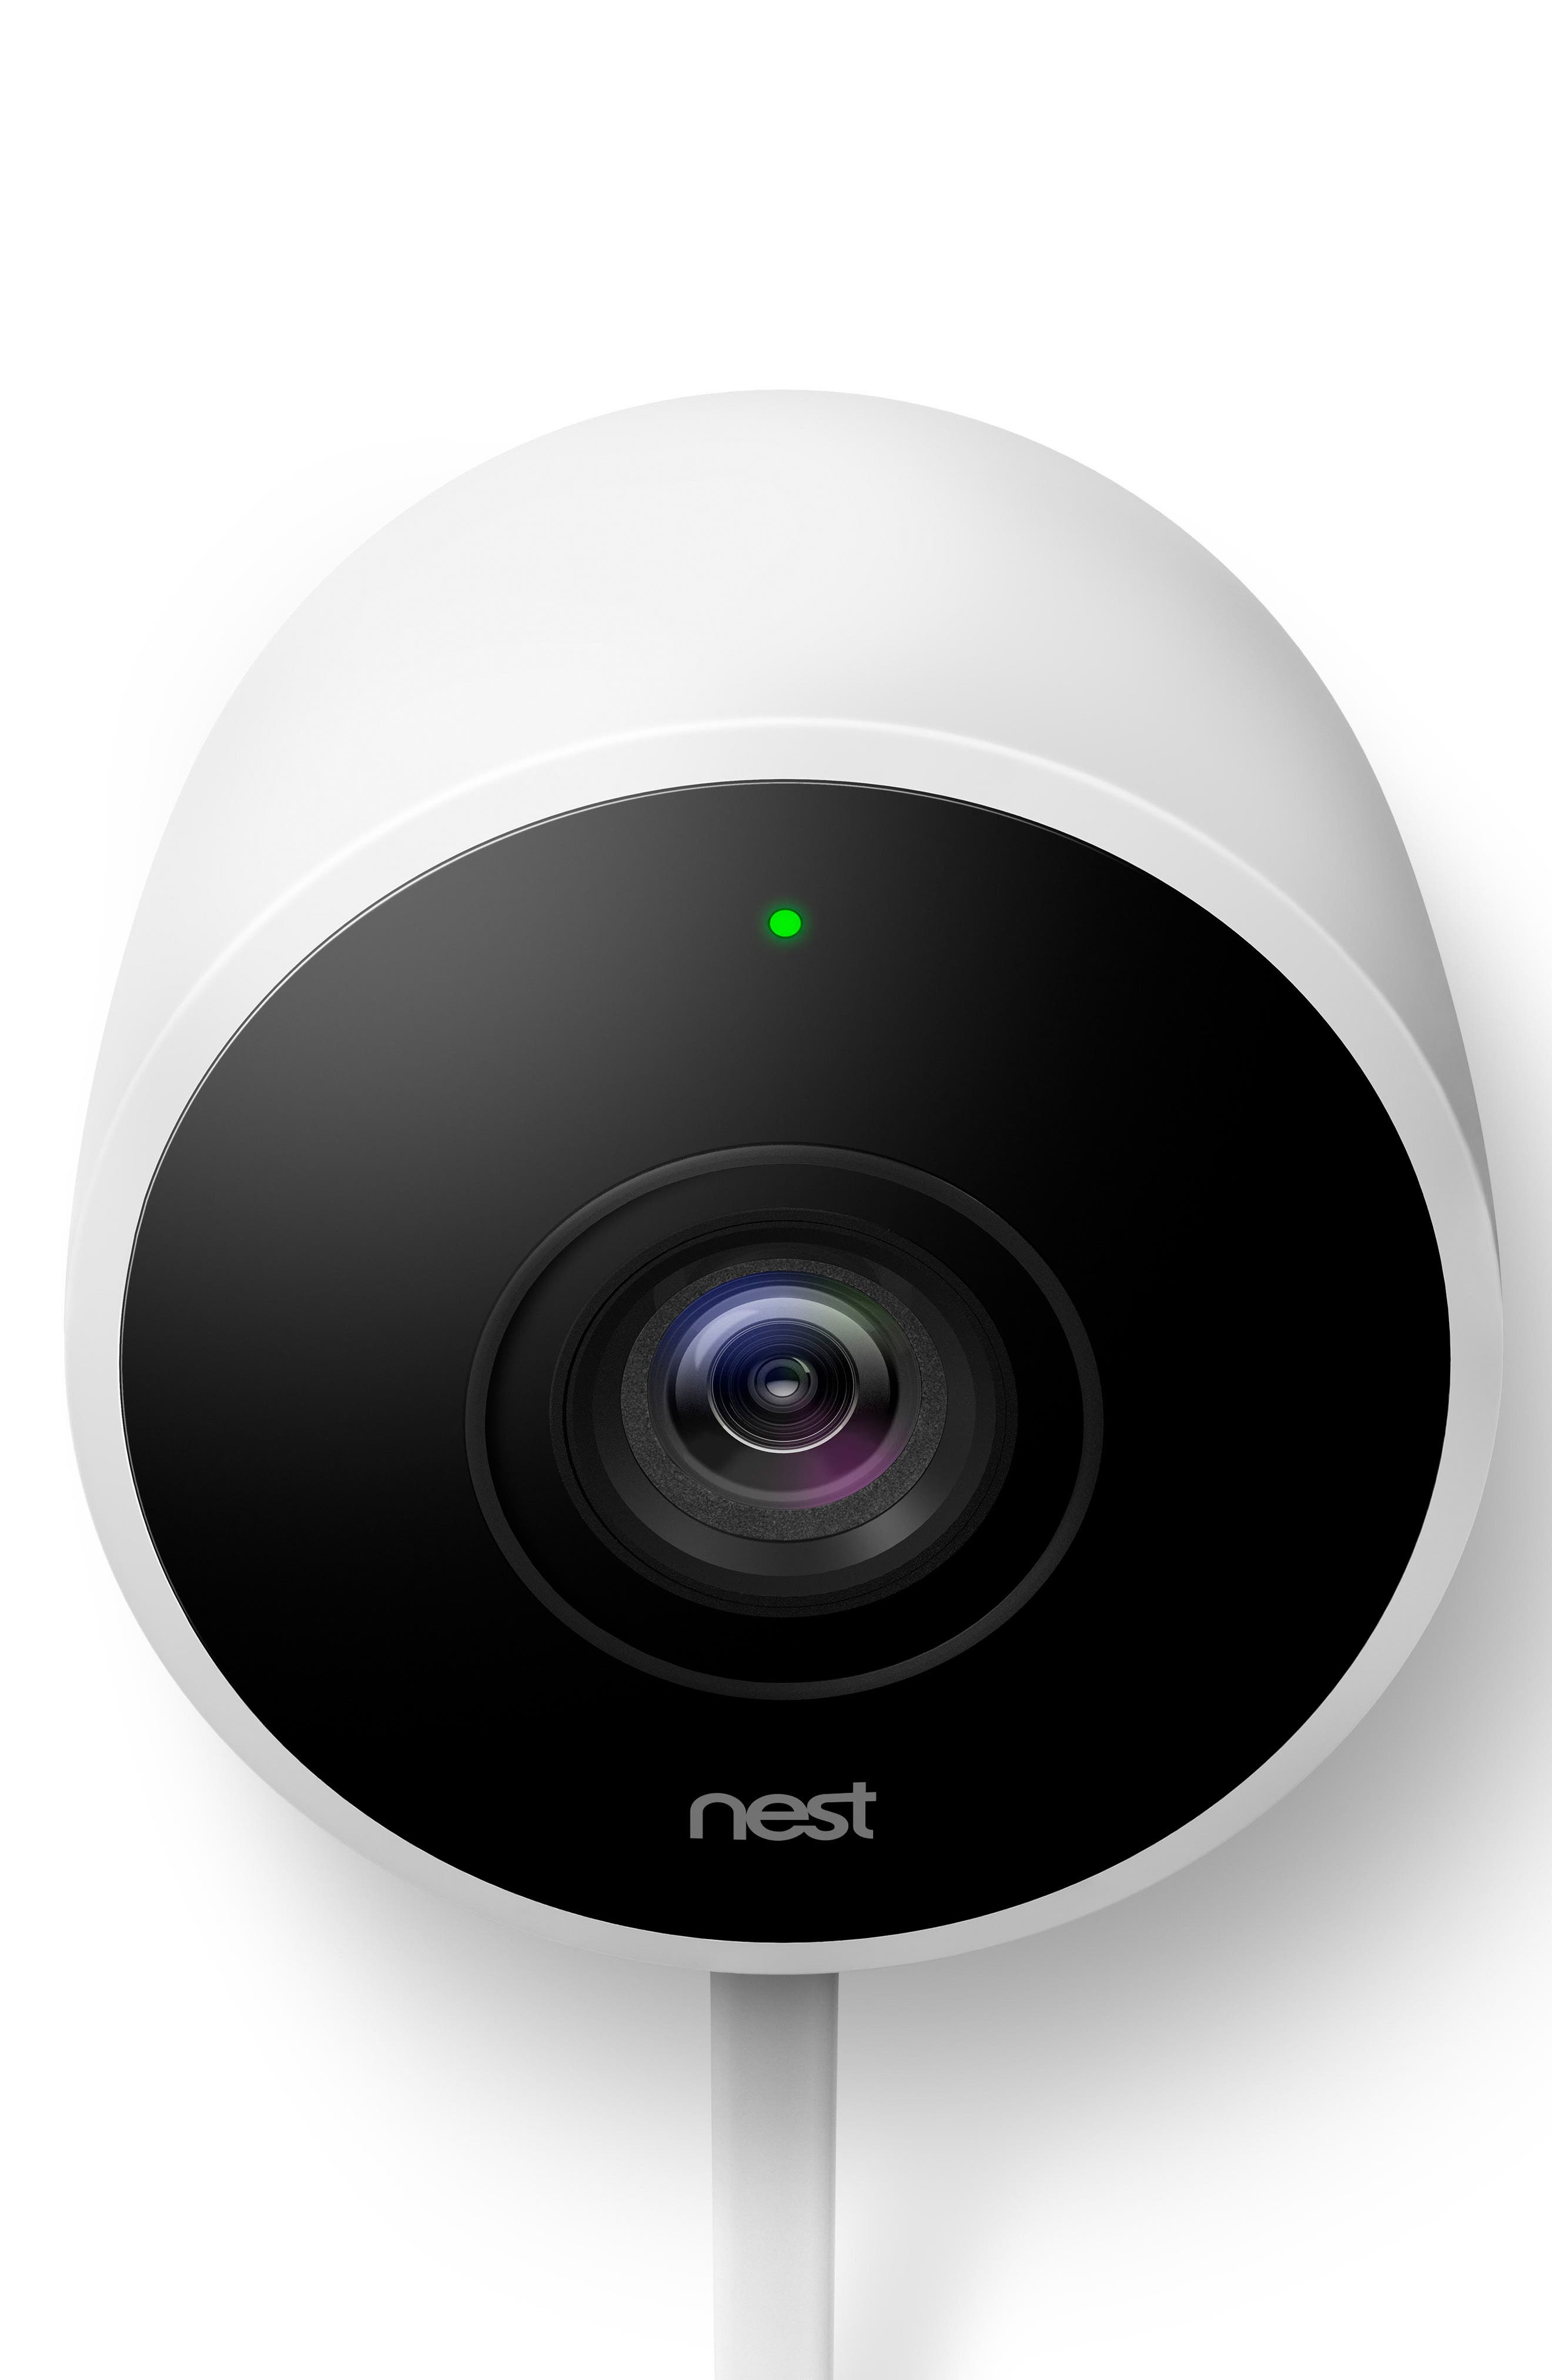 UPC 813917020142 product image for Nest Outdoor Security Camera, Size One Size - White | upcitemdb.com